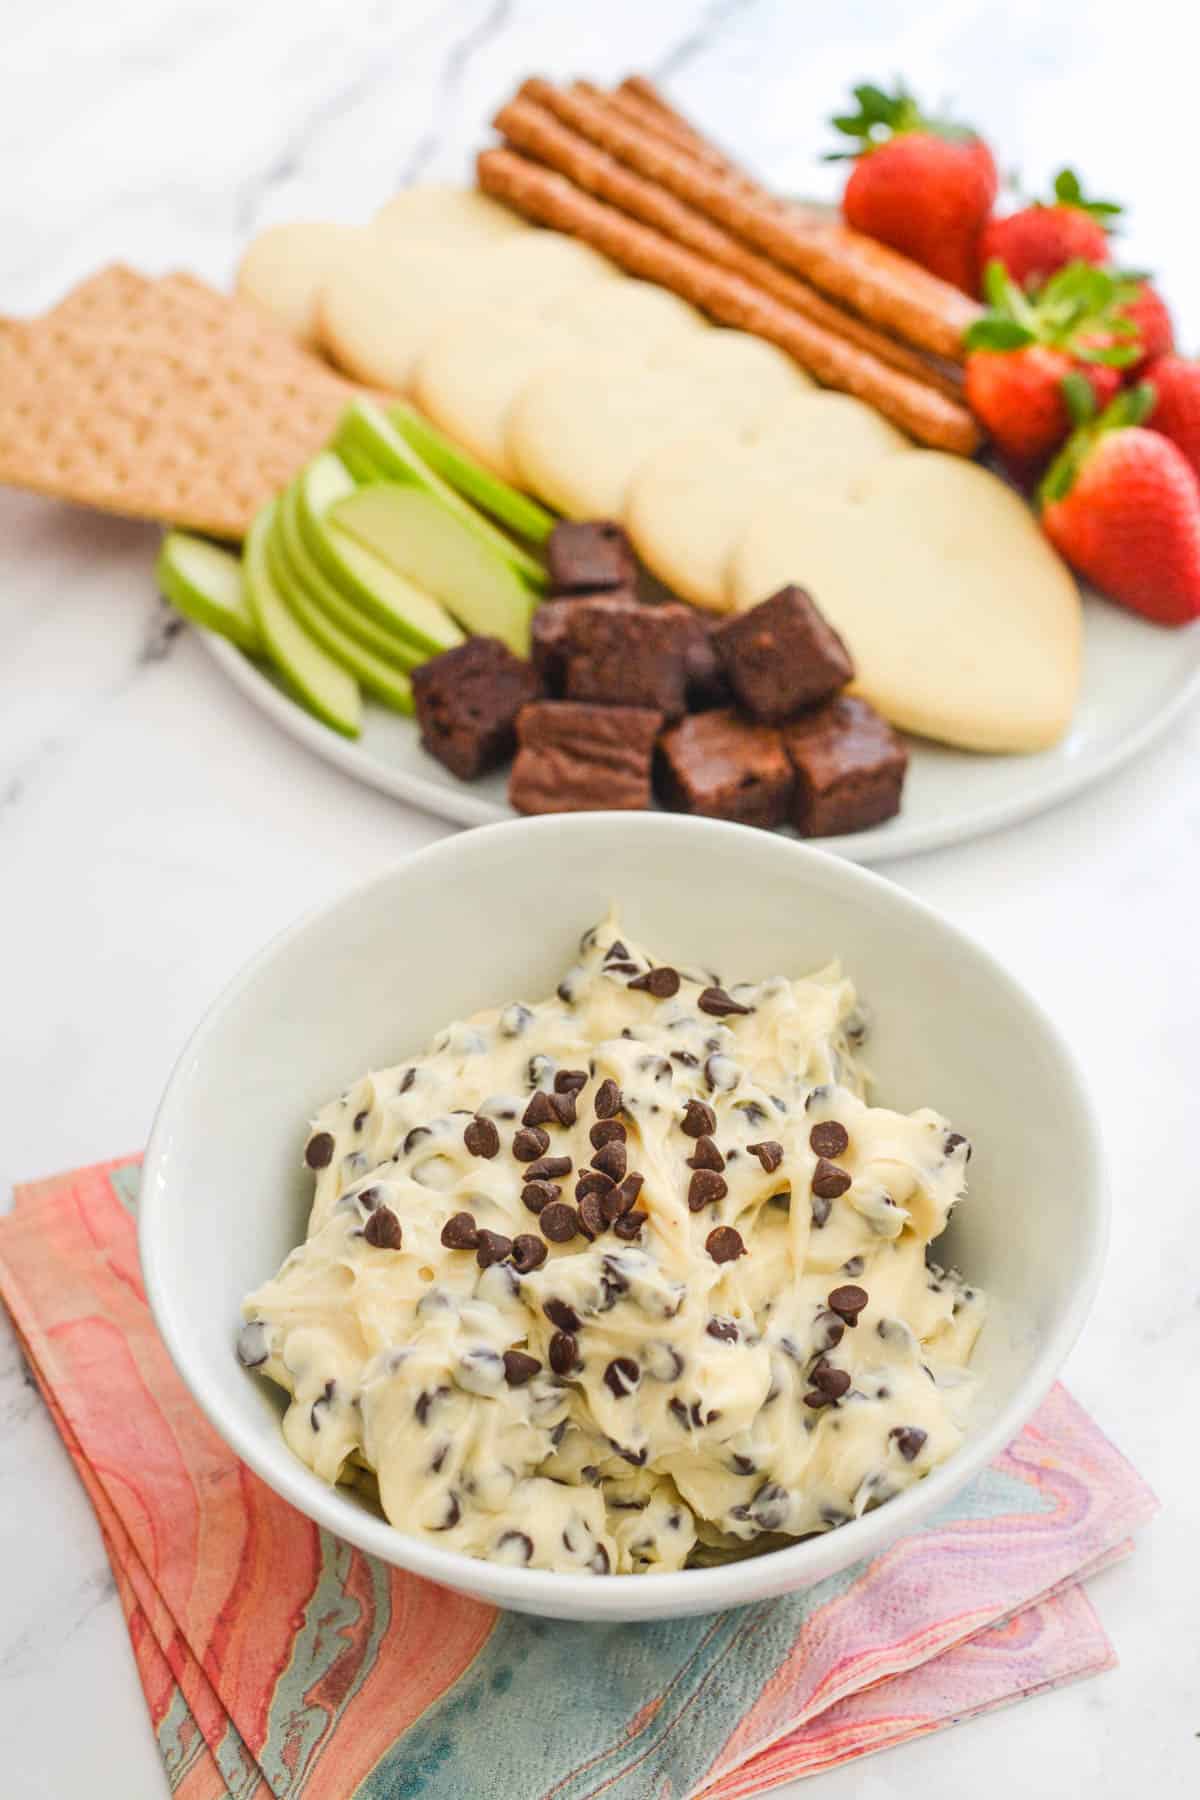 White serving bowl with cream cheese dip with chocolate chips next to a plate of dipping items like cookies.